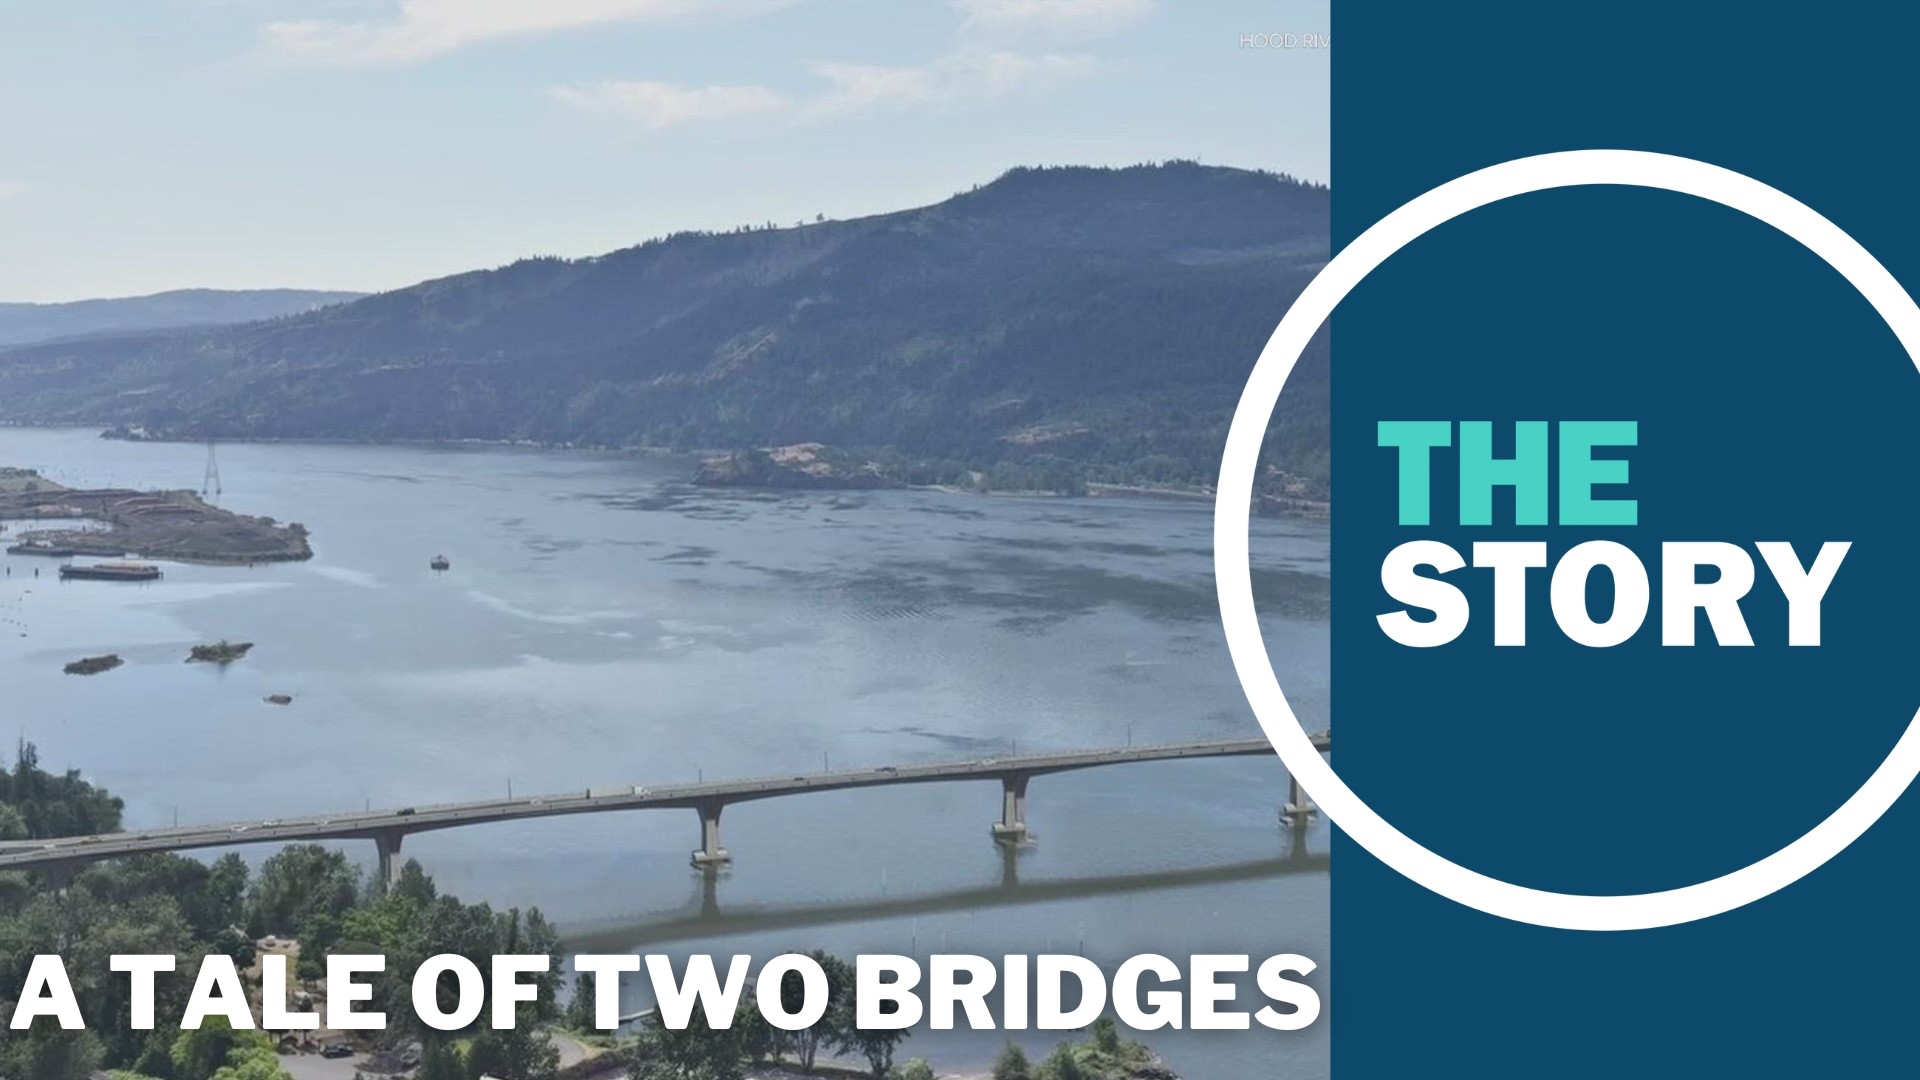 The replacement Hood River Bridge is expected to cost about $600 million, while the Interstate Bridge Replacement project is likely to be around $6 billion.